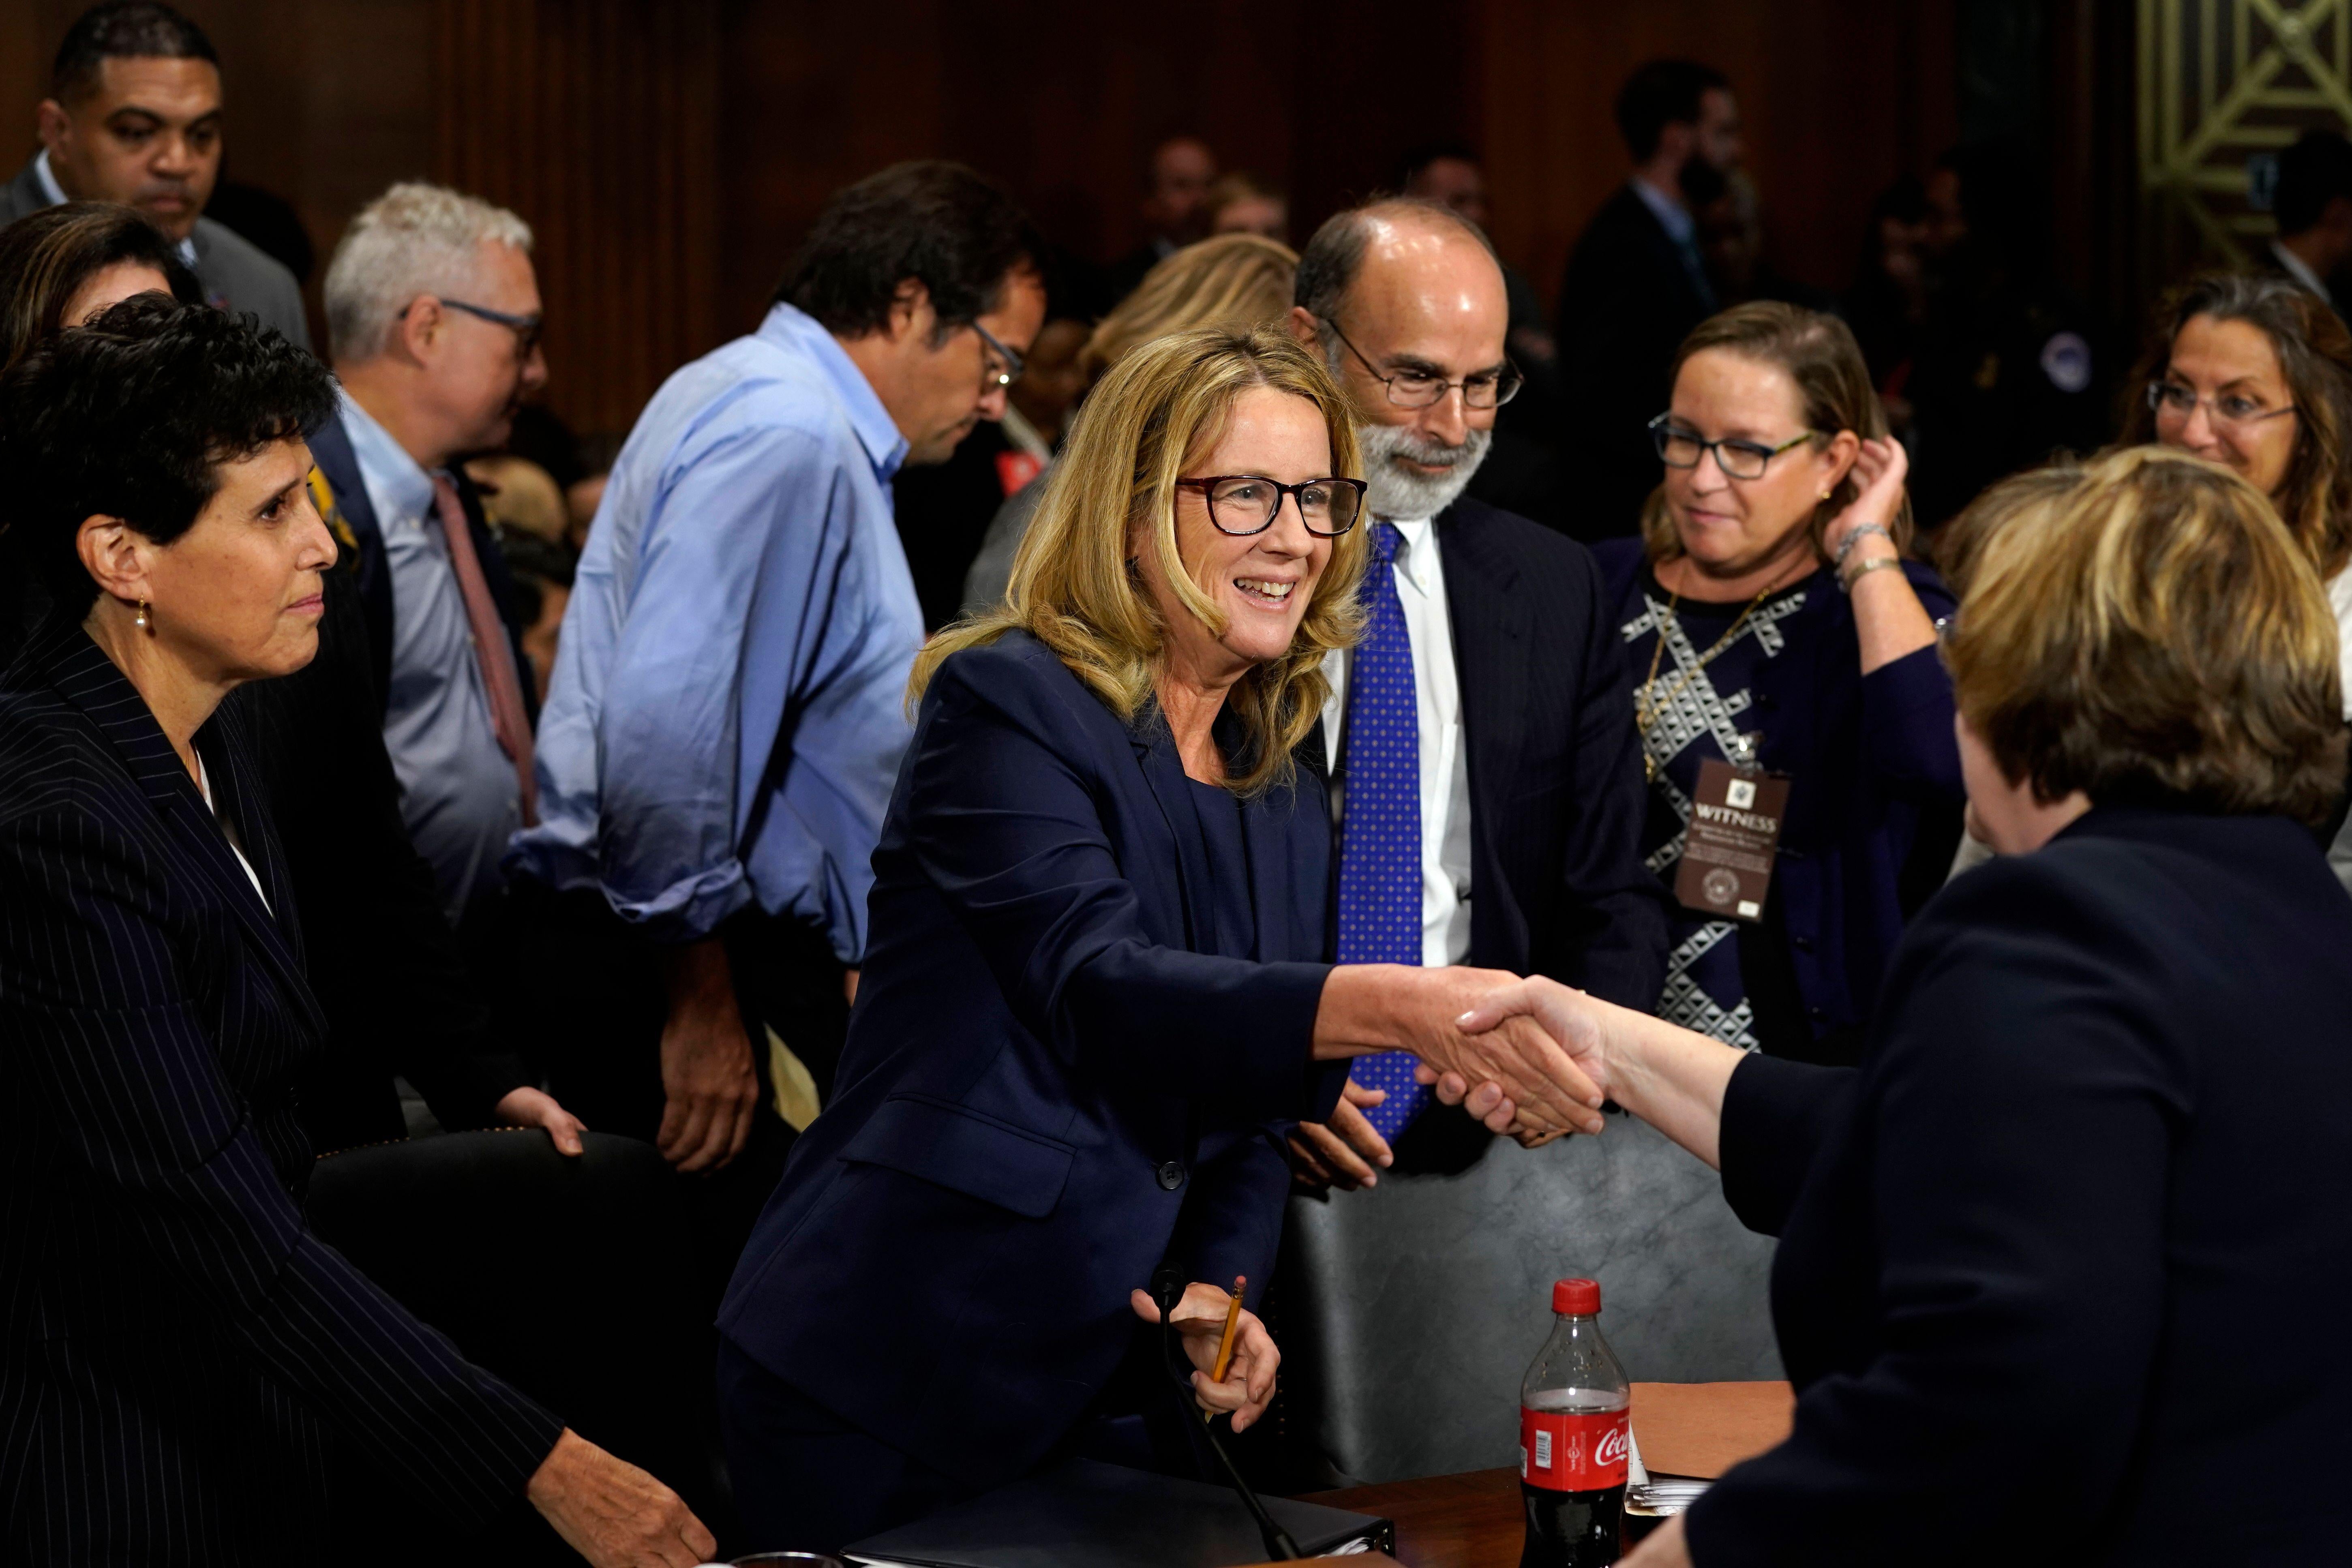 Christine Blasey Ford mentioned the GoFundMe campaigns during her testimony.